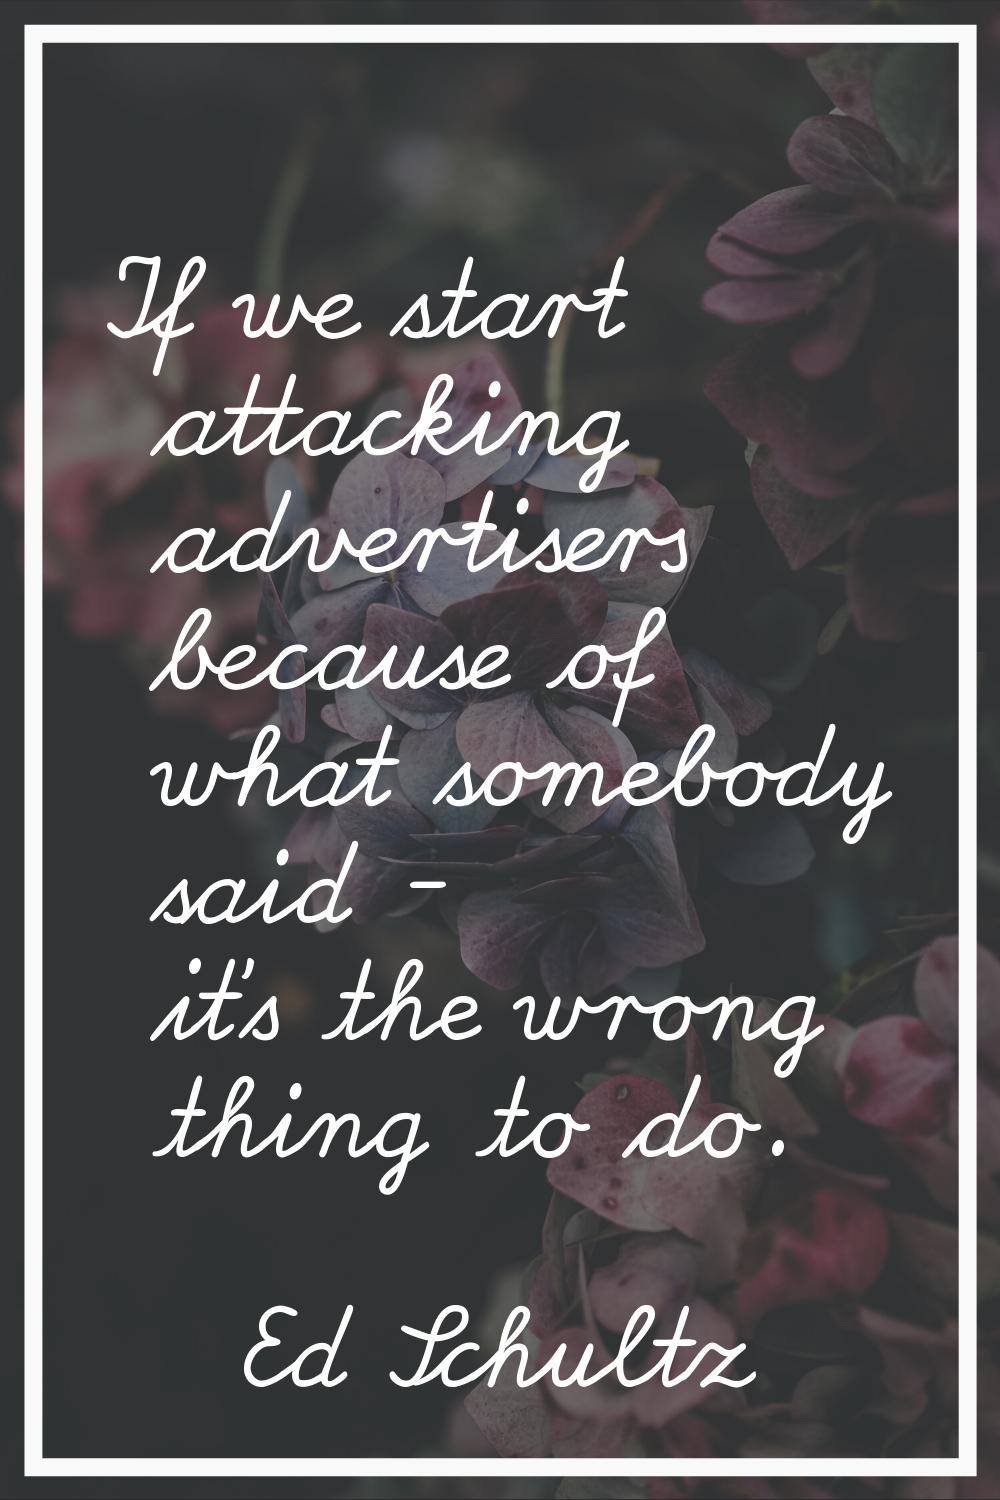 If we start attacking advertisers because of what somebody said - it's the wrong thing to do.